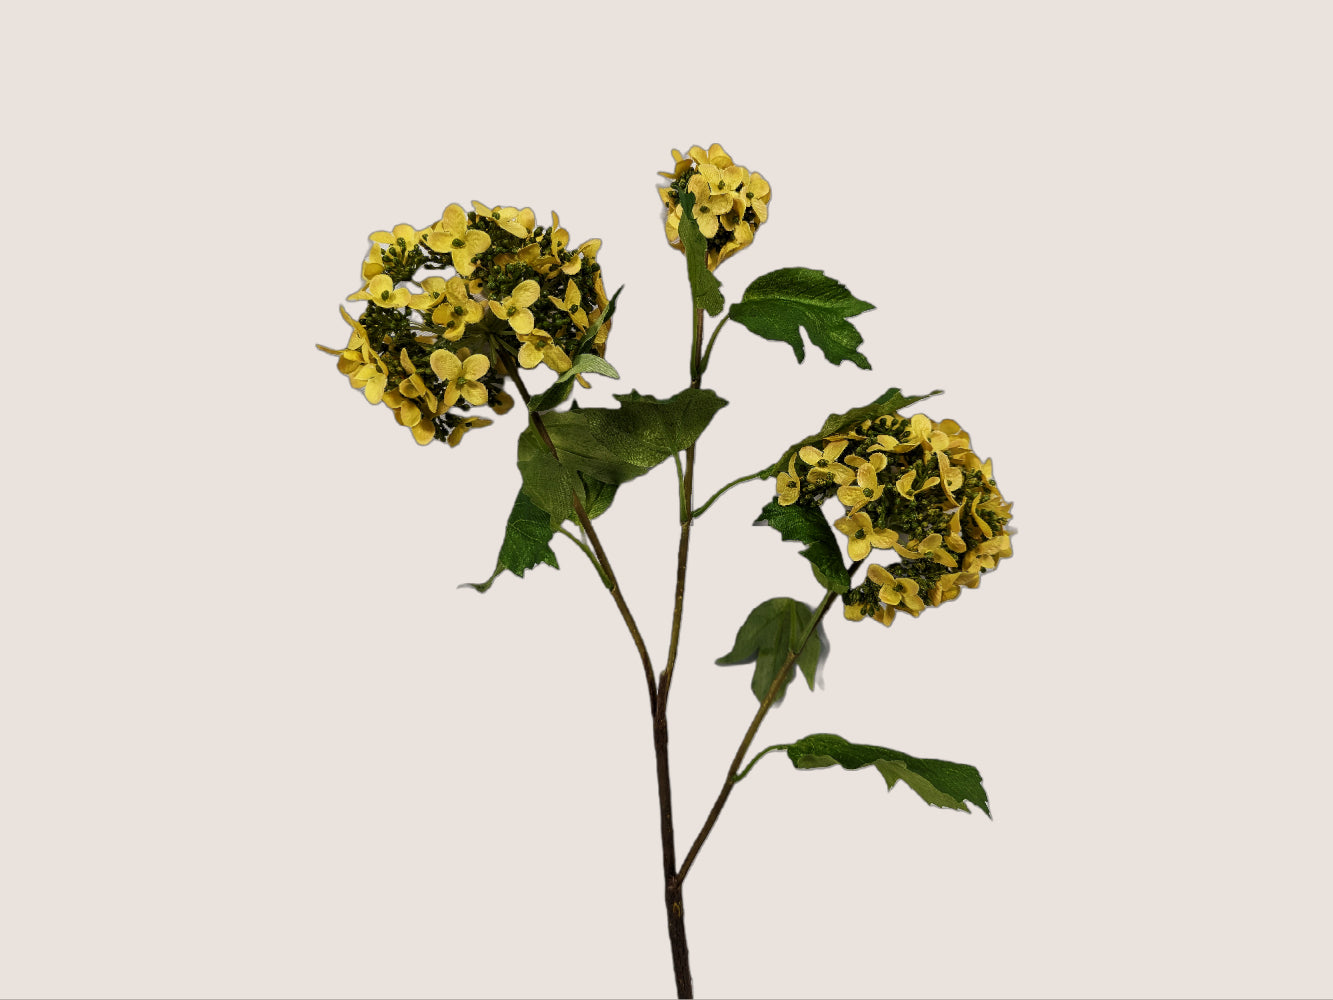 Artificial yellow snowball hydrangea flower, measuring 24 inches in height (13 inches for the stem and 11 inches for the floral blooms and branches). Each stem features three blooms of small, medium, and large sizes. The image is shown against a neutral beige background.